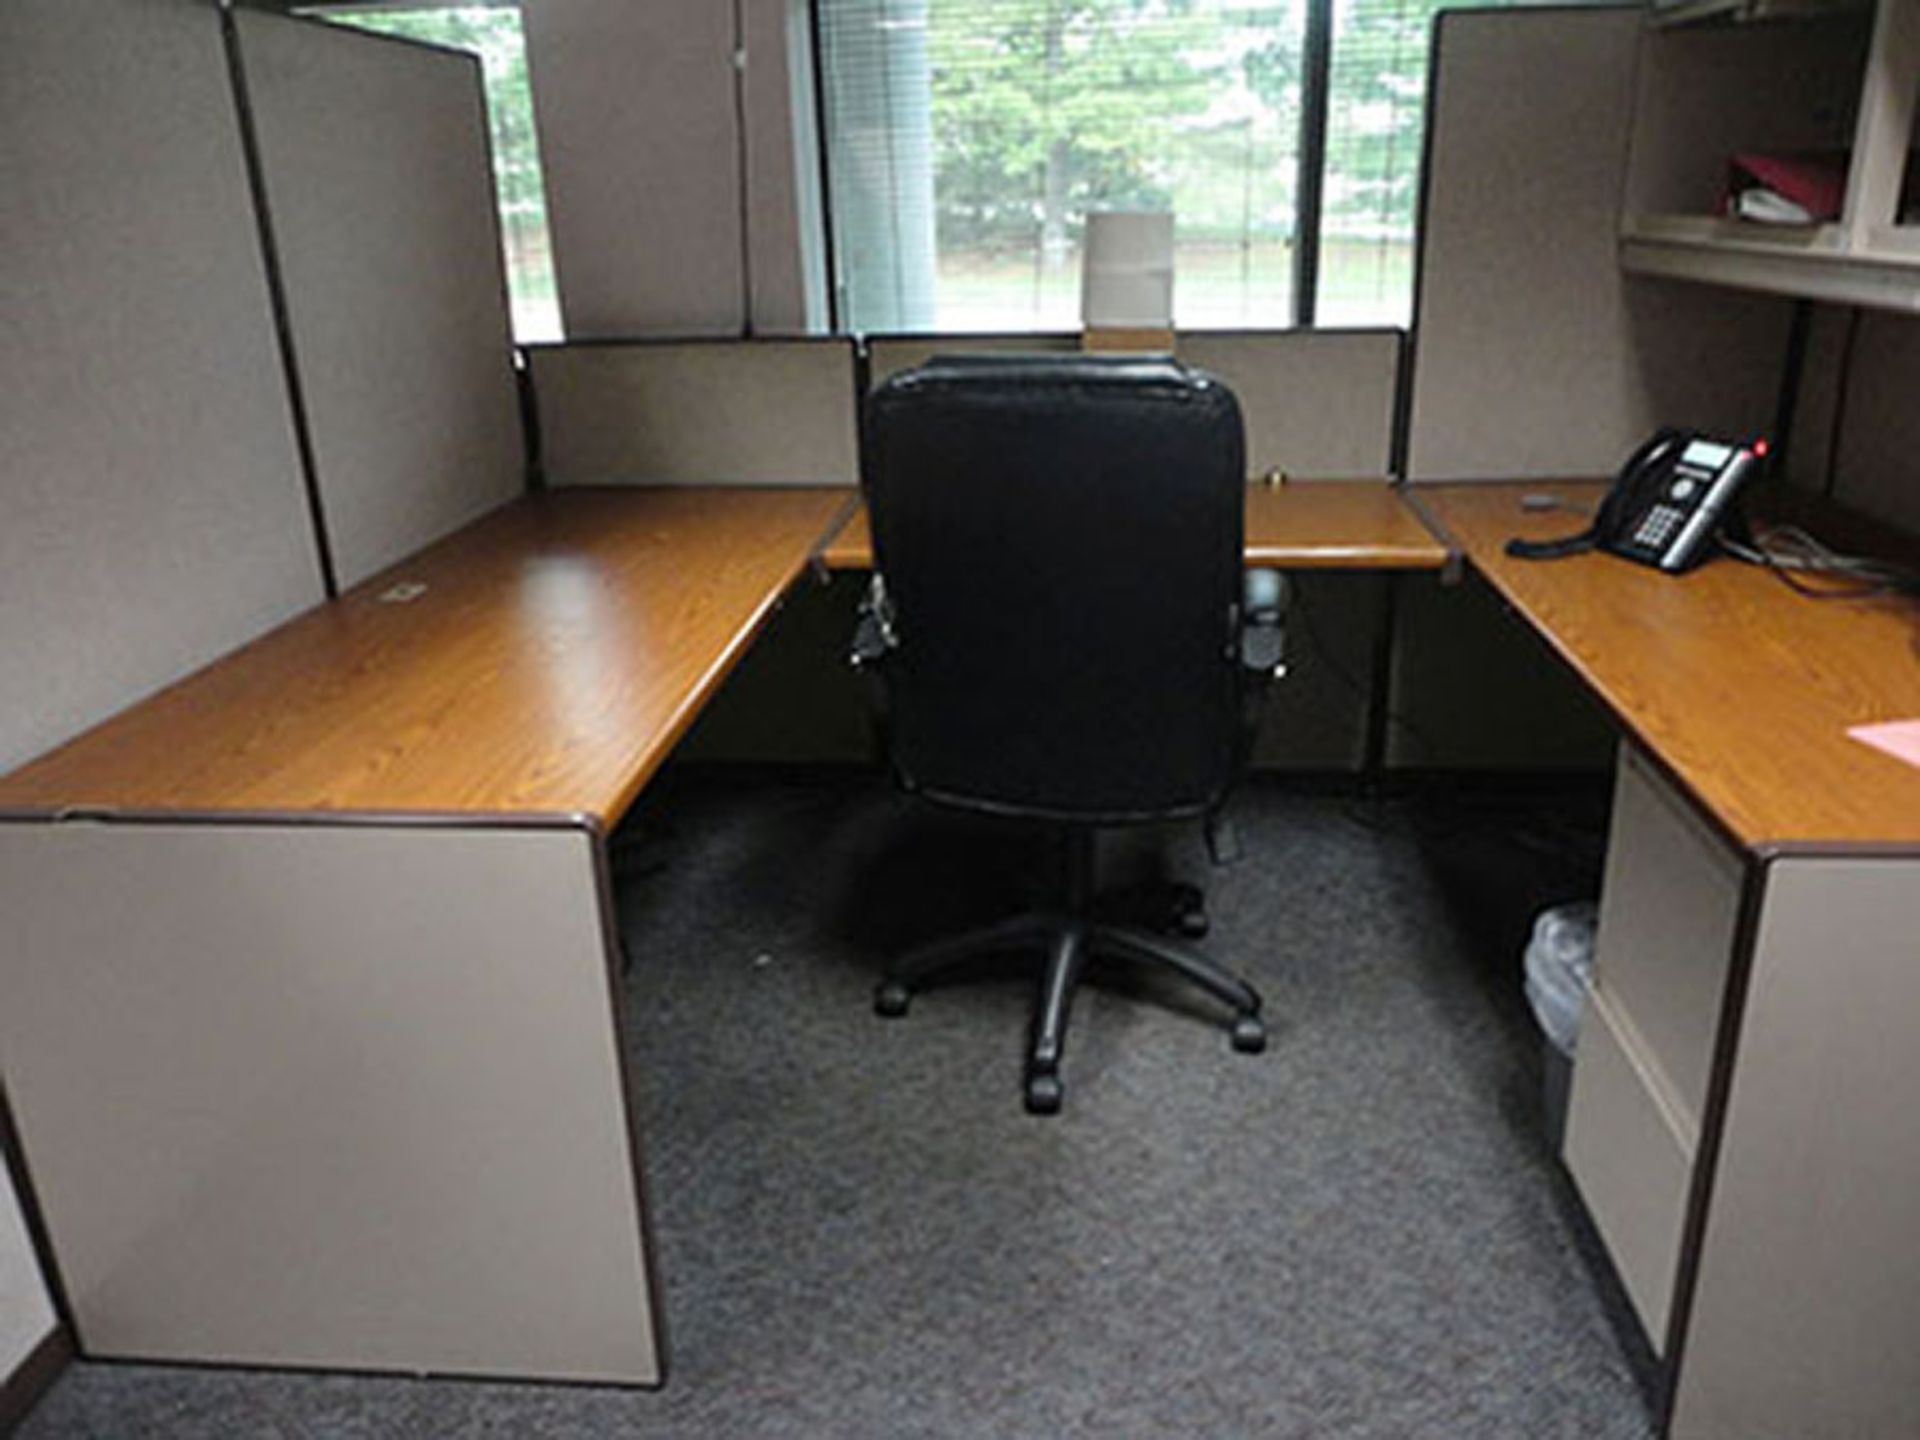 MODULAR OFFICE SYSTEM - Image 5 of 7